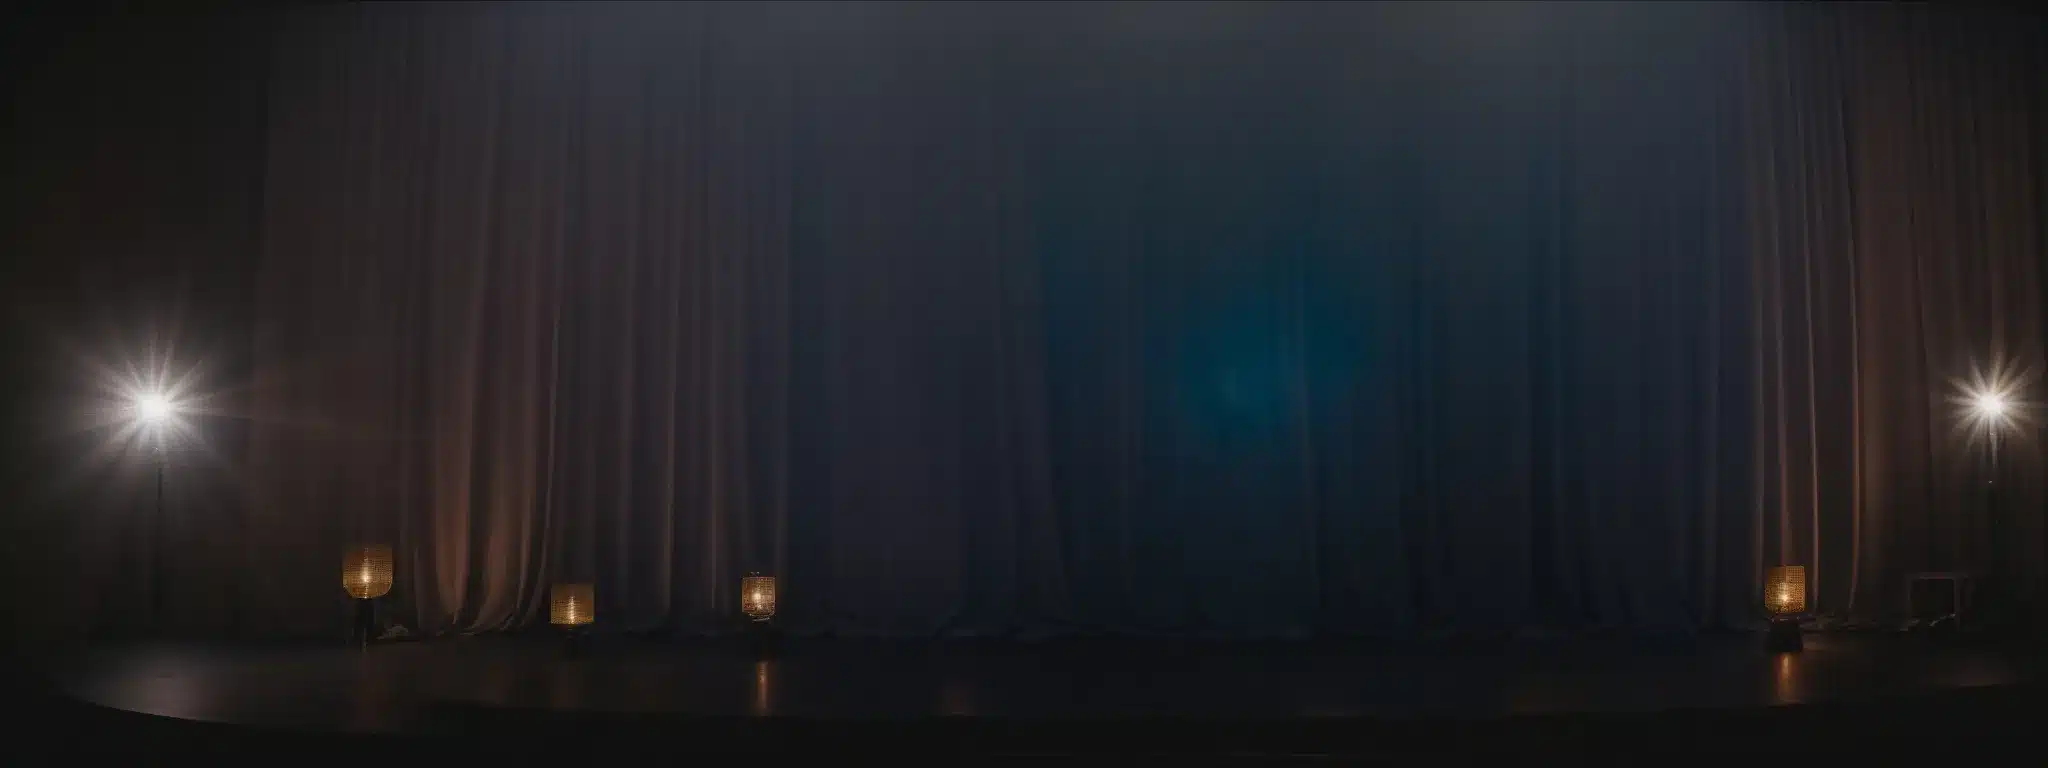 A Spotlight Illuminates An Award Trophy On A Pedestal Against The Backdrop Of An Elegant, Curtain-Draped Stage.